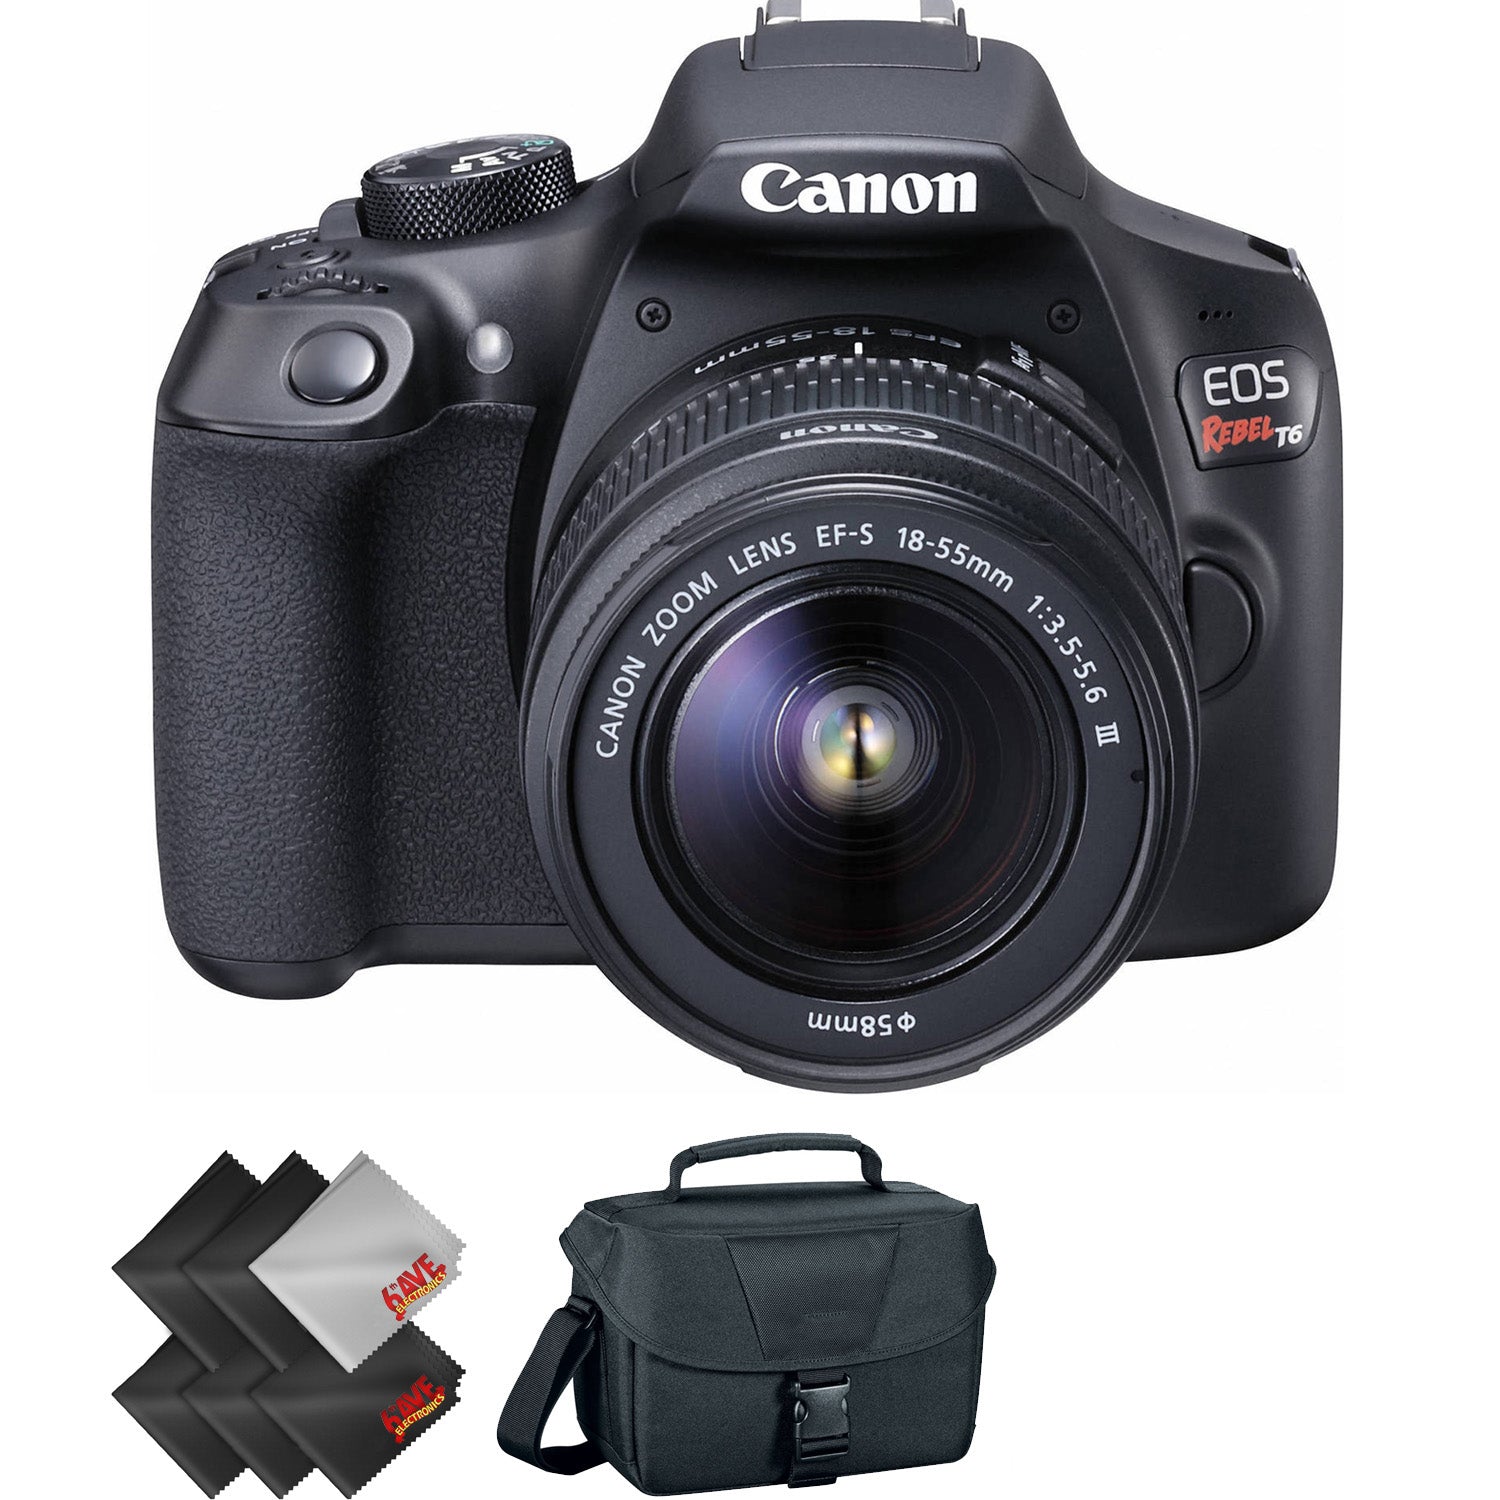 Canon EOS Rebel T6 DSLR Camera with 18-55mm and 75-300mm Lenses Kit + 1 Year Warranty Bundle